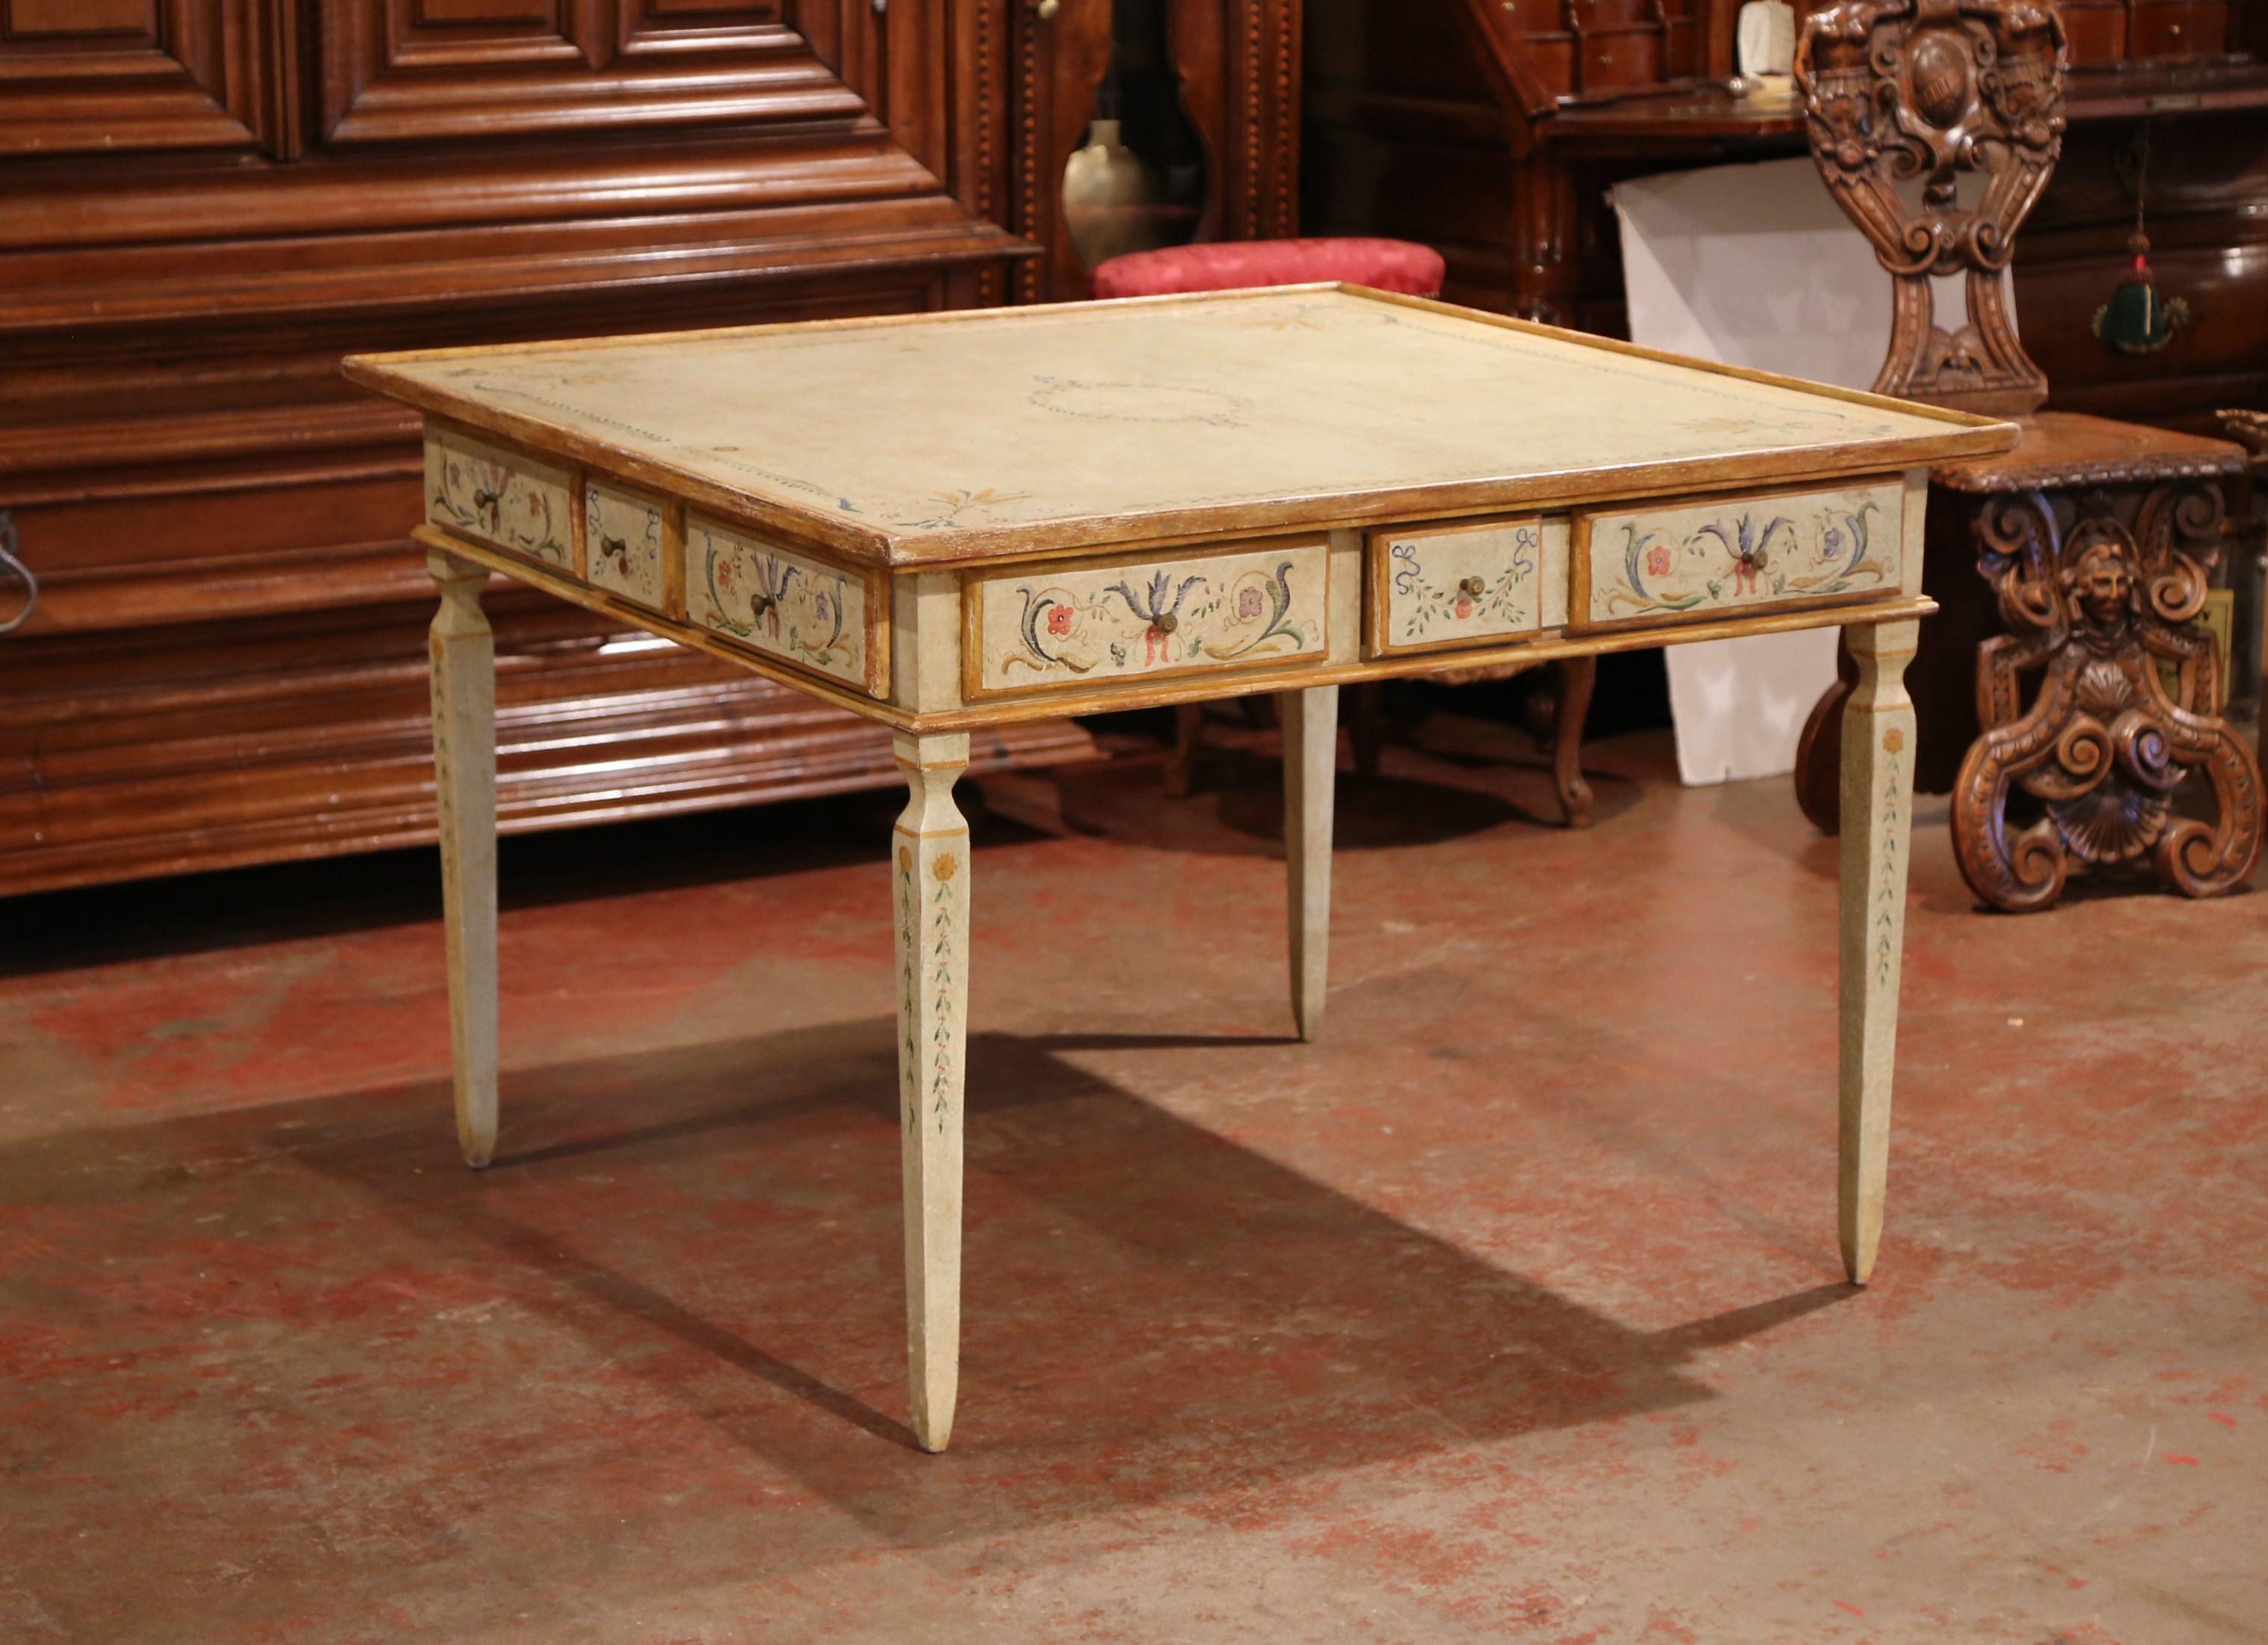 This elegant hand painted square table was created in Italy, circa 1920. The traditional, antique game table stands on four tapered legs and features a square top embellished with raised edges. The table is outfitted with drawers on all four sides,